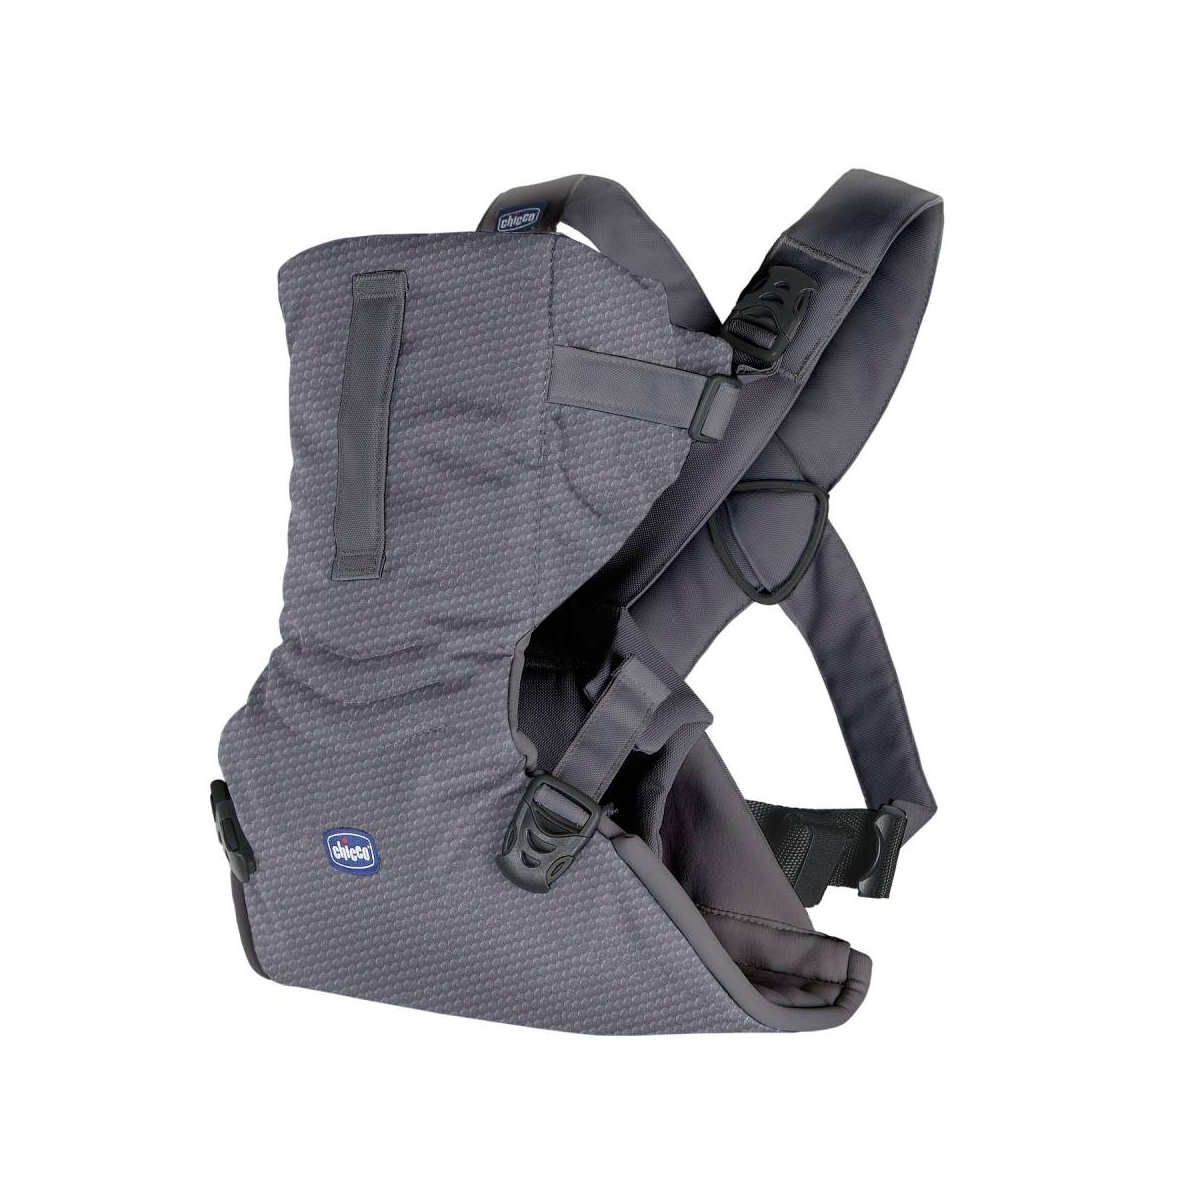 Chicco Easyfit Baby Carrier